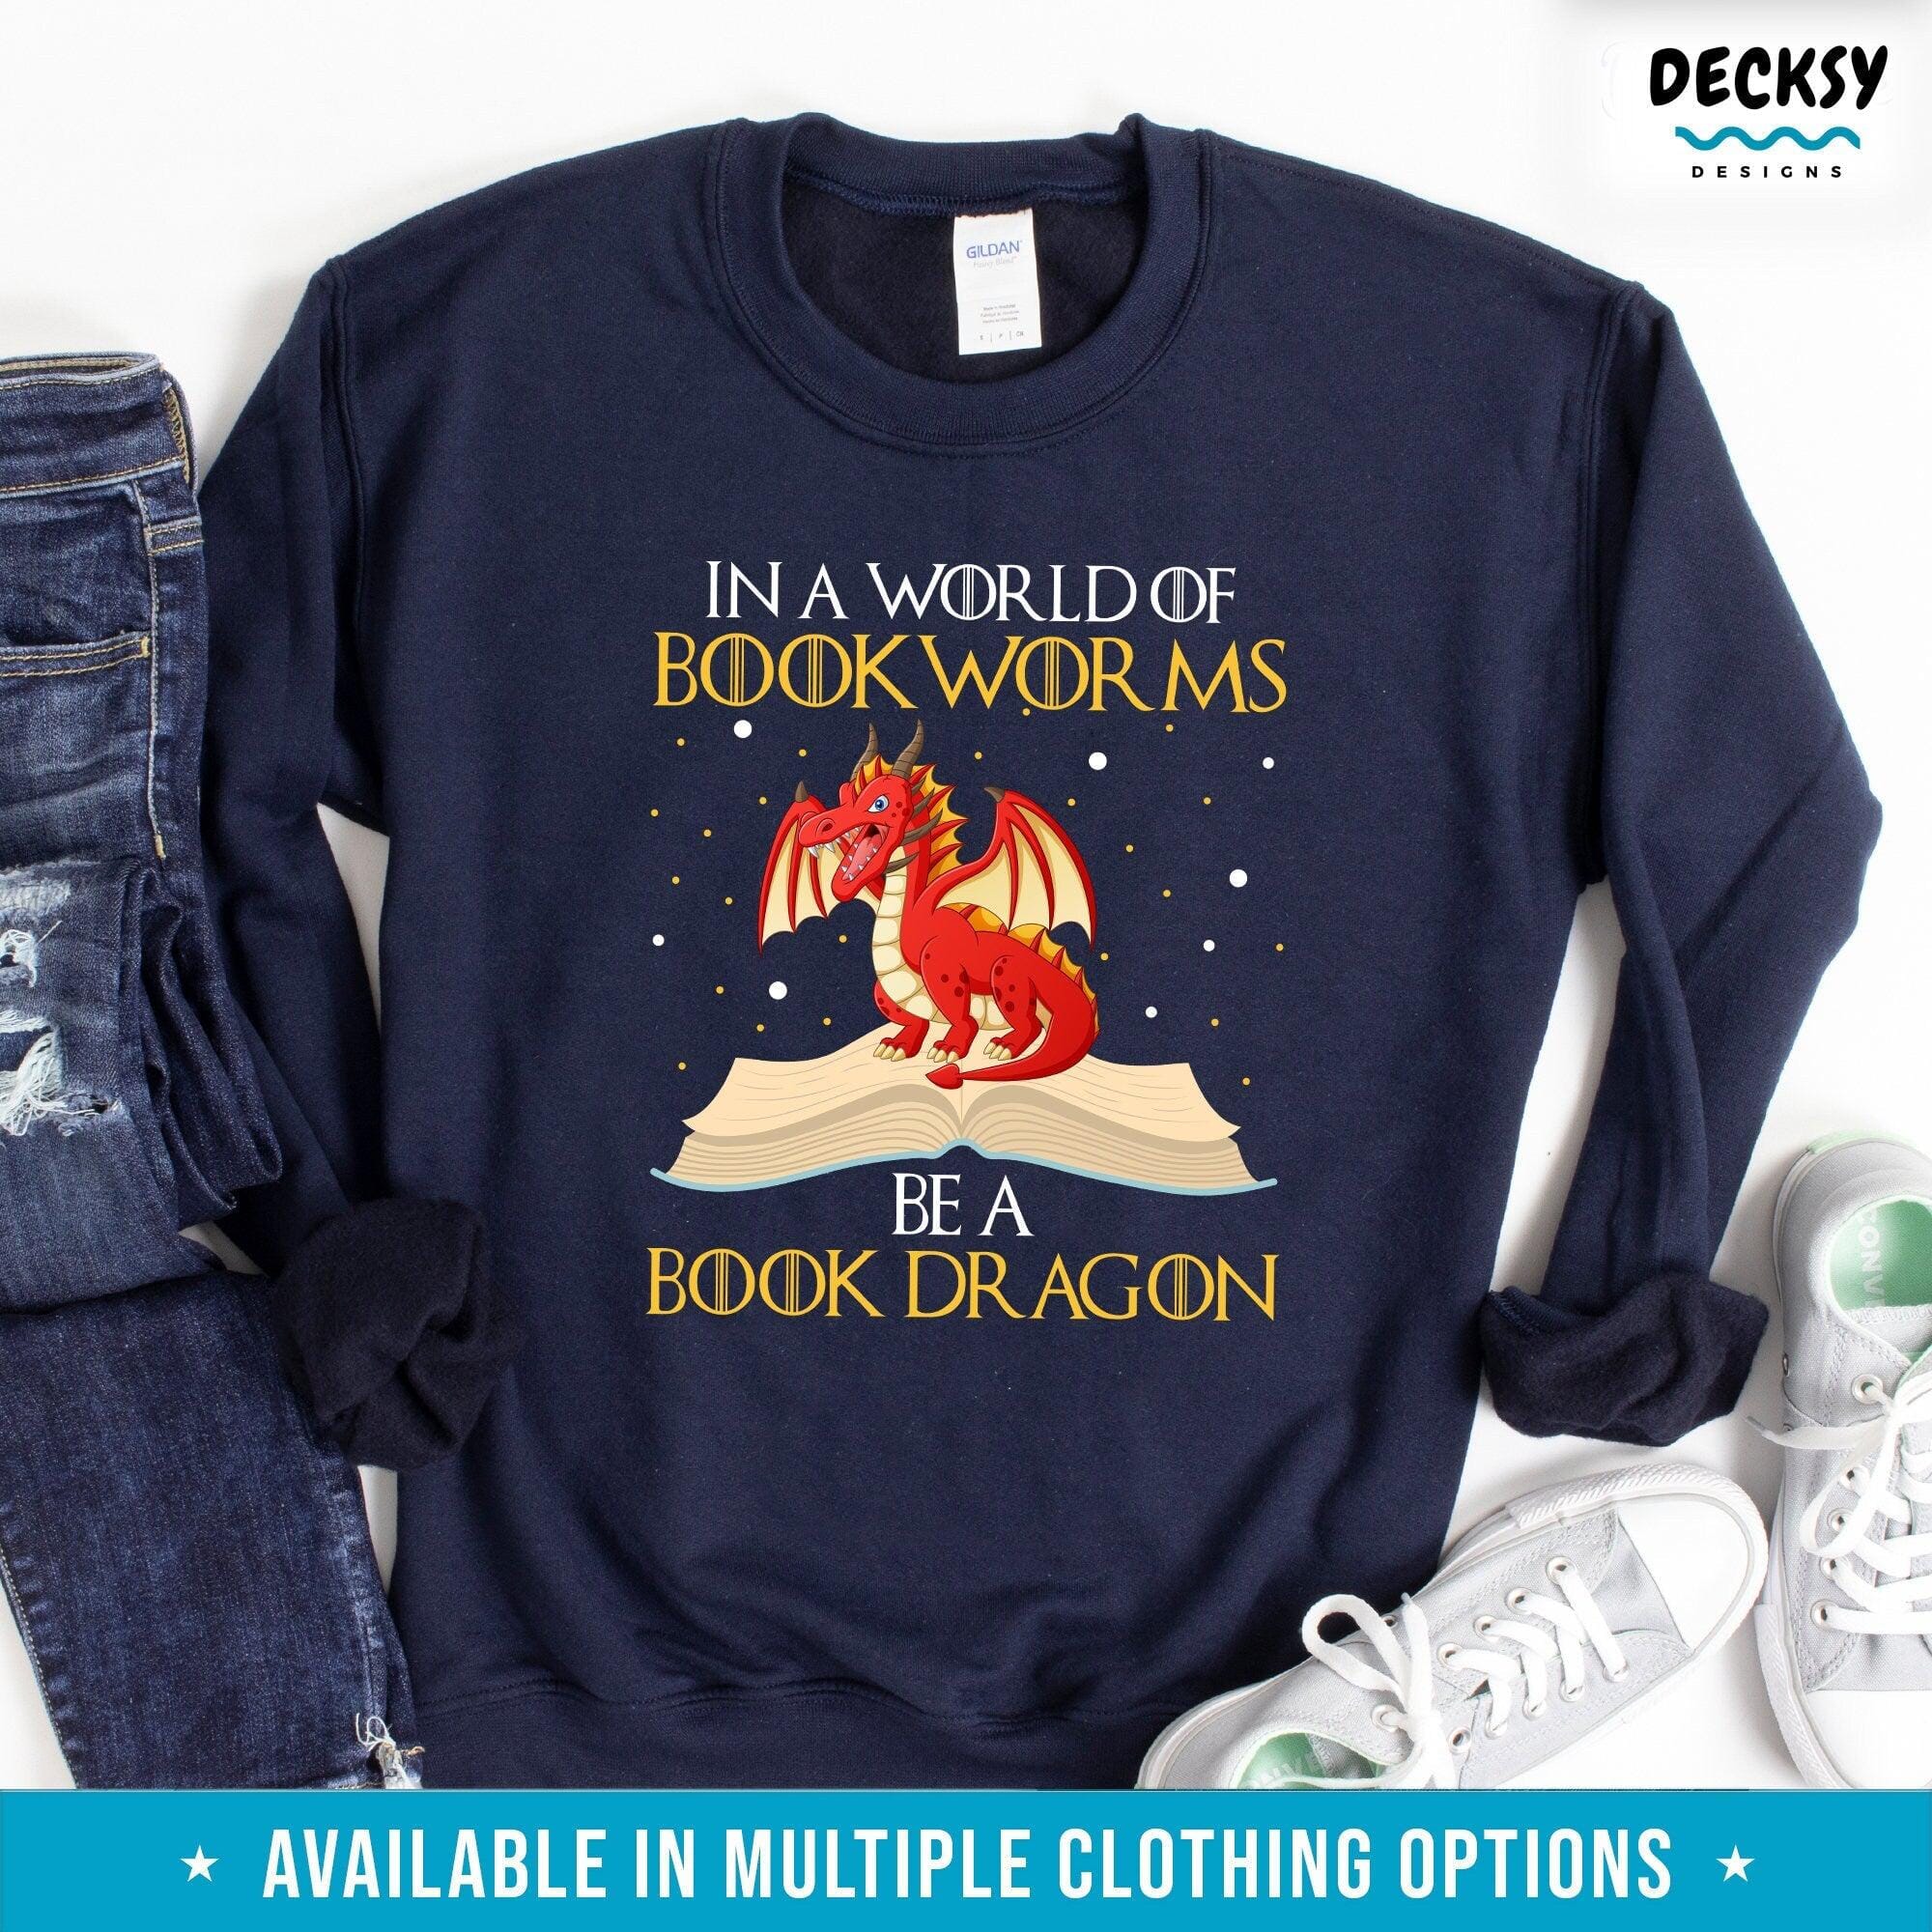 Book Lover Shirt, Book Worm Gift-Clothing:Gender-Neutral Adult Clothing:Tops & Tees:T-shirts:Graphic Tees-DecksyDesigns